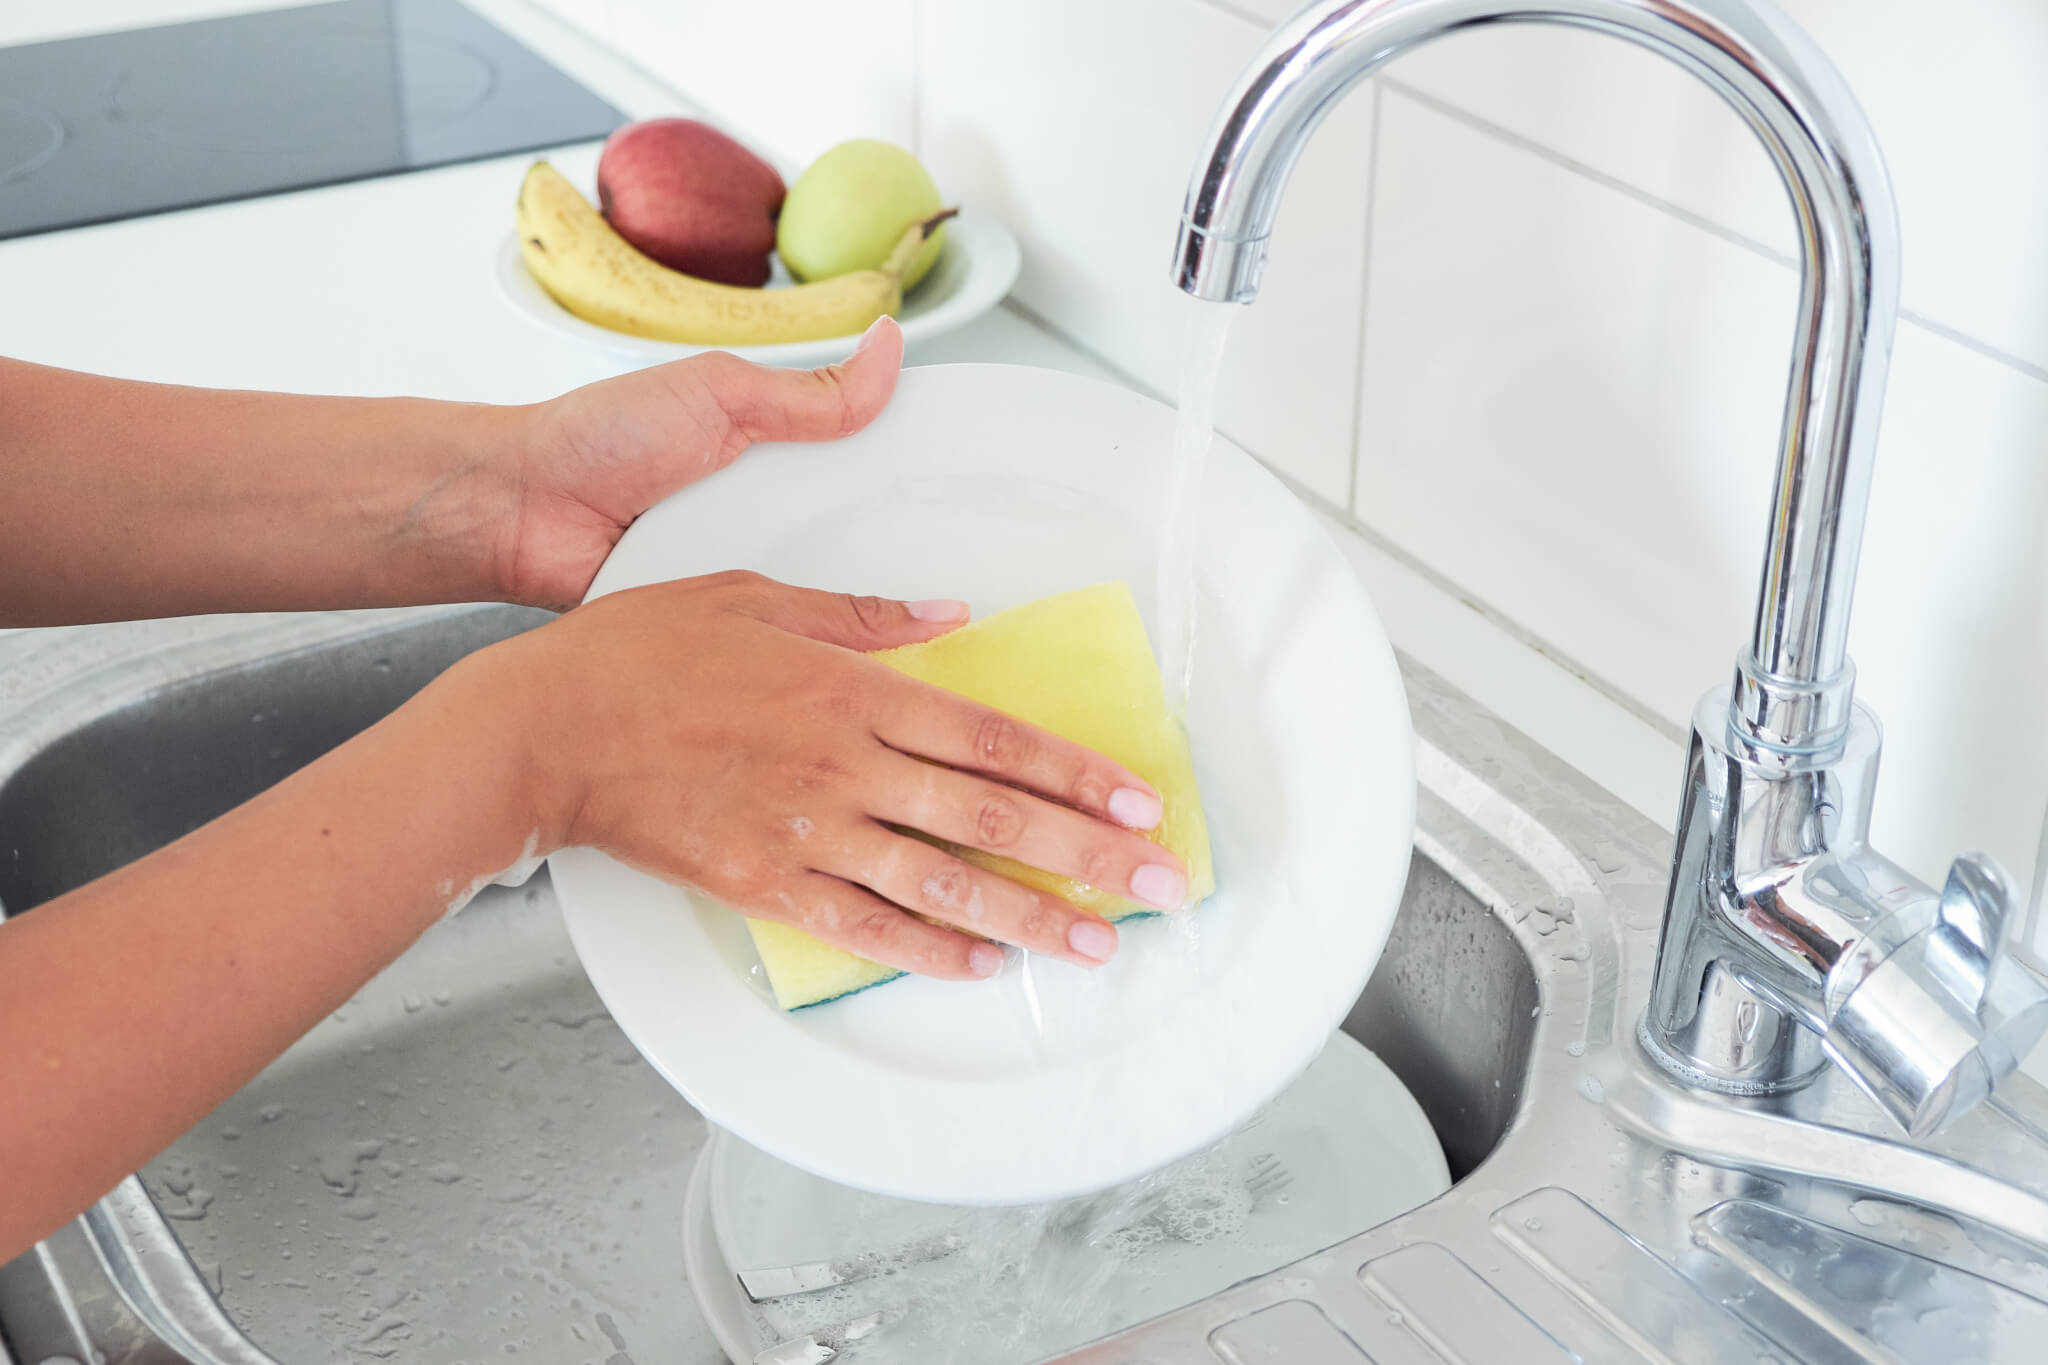 Person washing dishes with sponge in kitchen sink